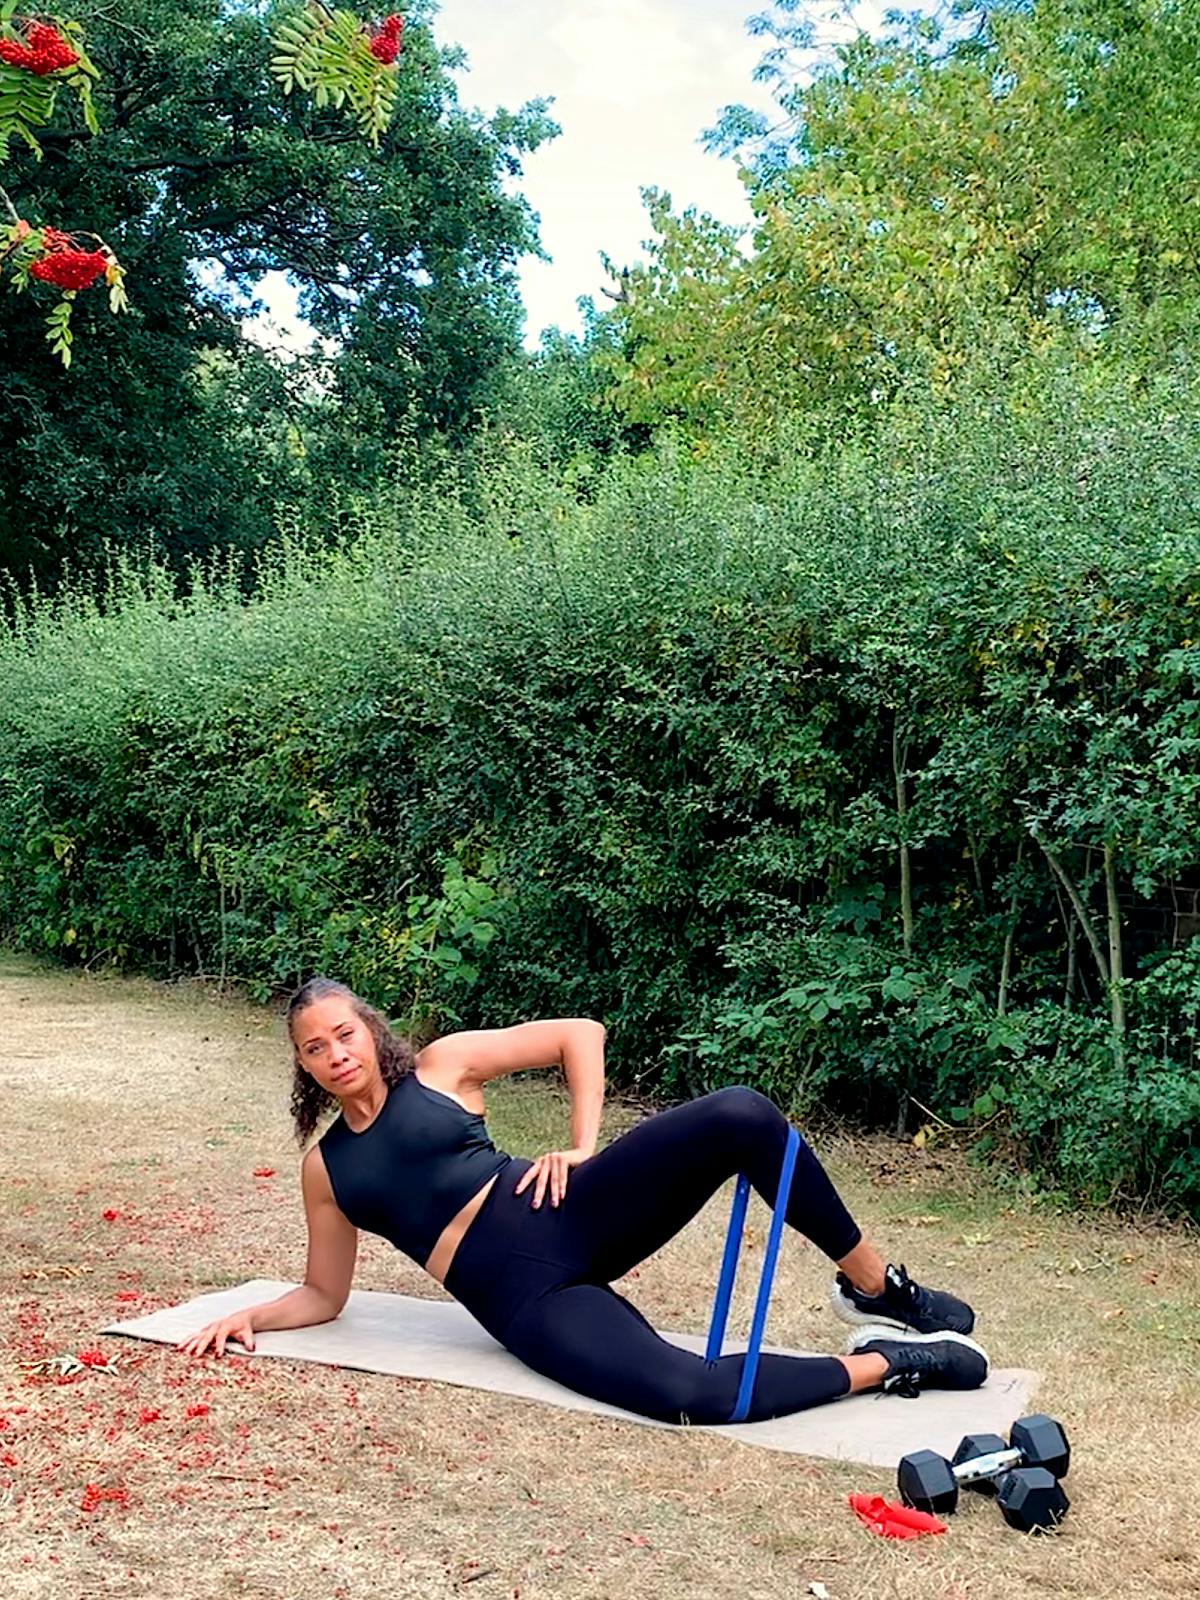 Hip workout: ease tightness and pain with glute strengthening